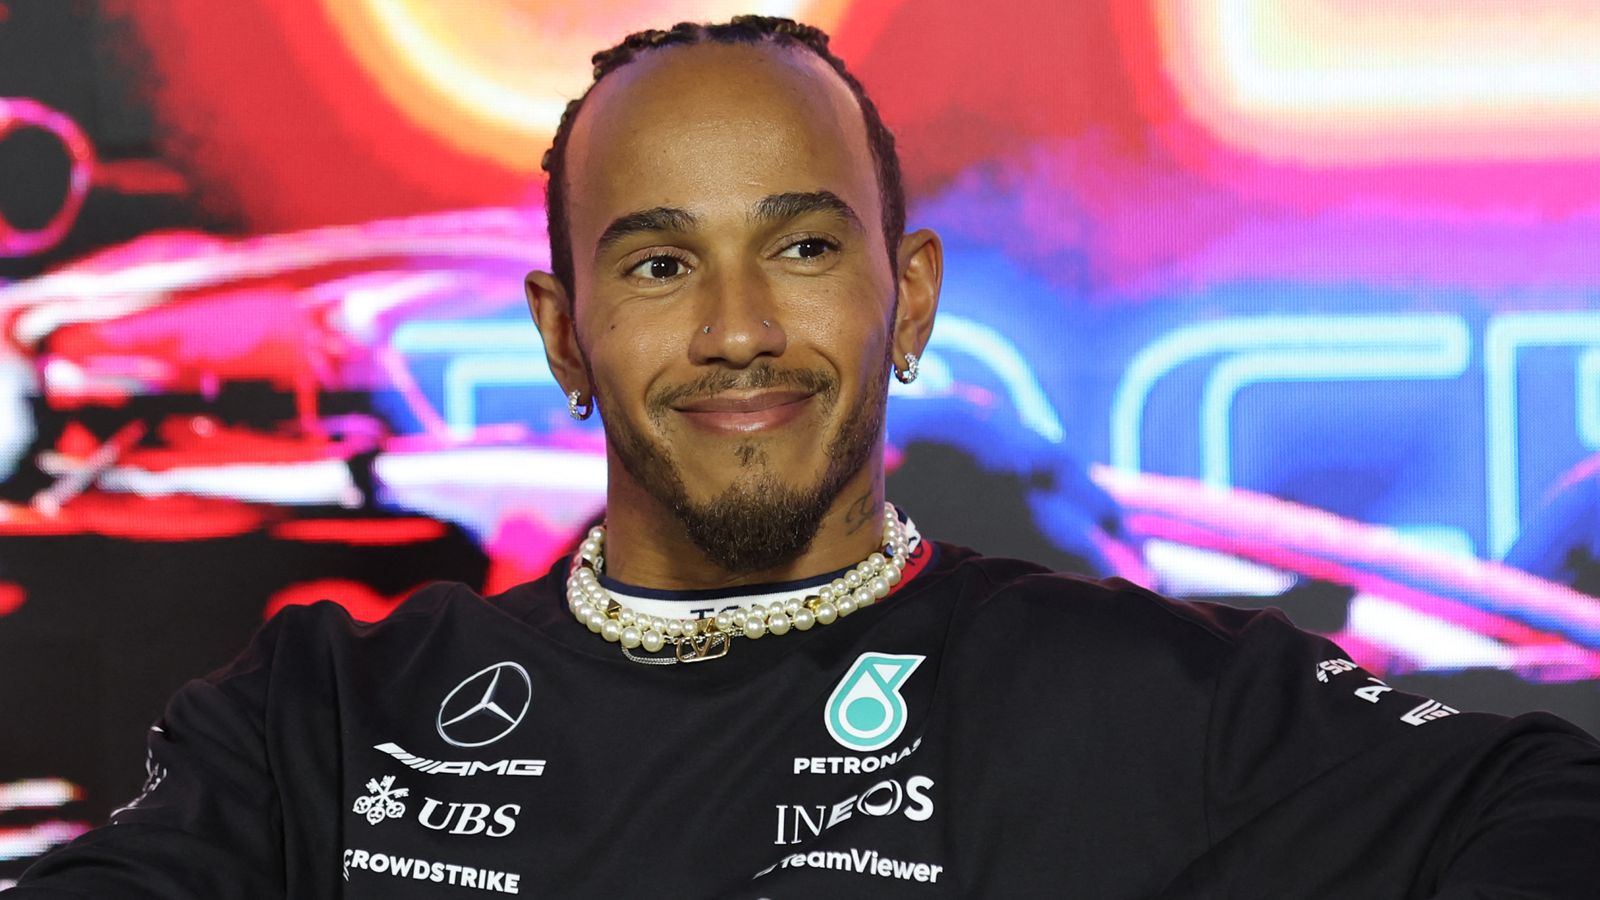 mercedes boss says timing of hamilton's ferrari decision 'bit us' - but insists he holds 'no grudge'